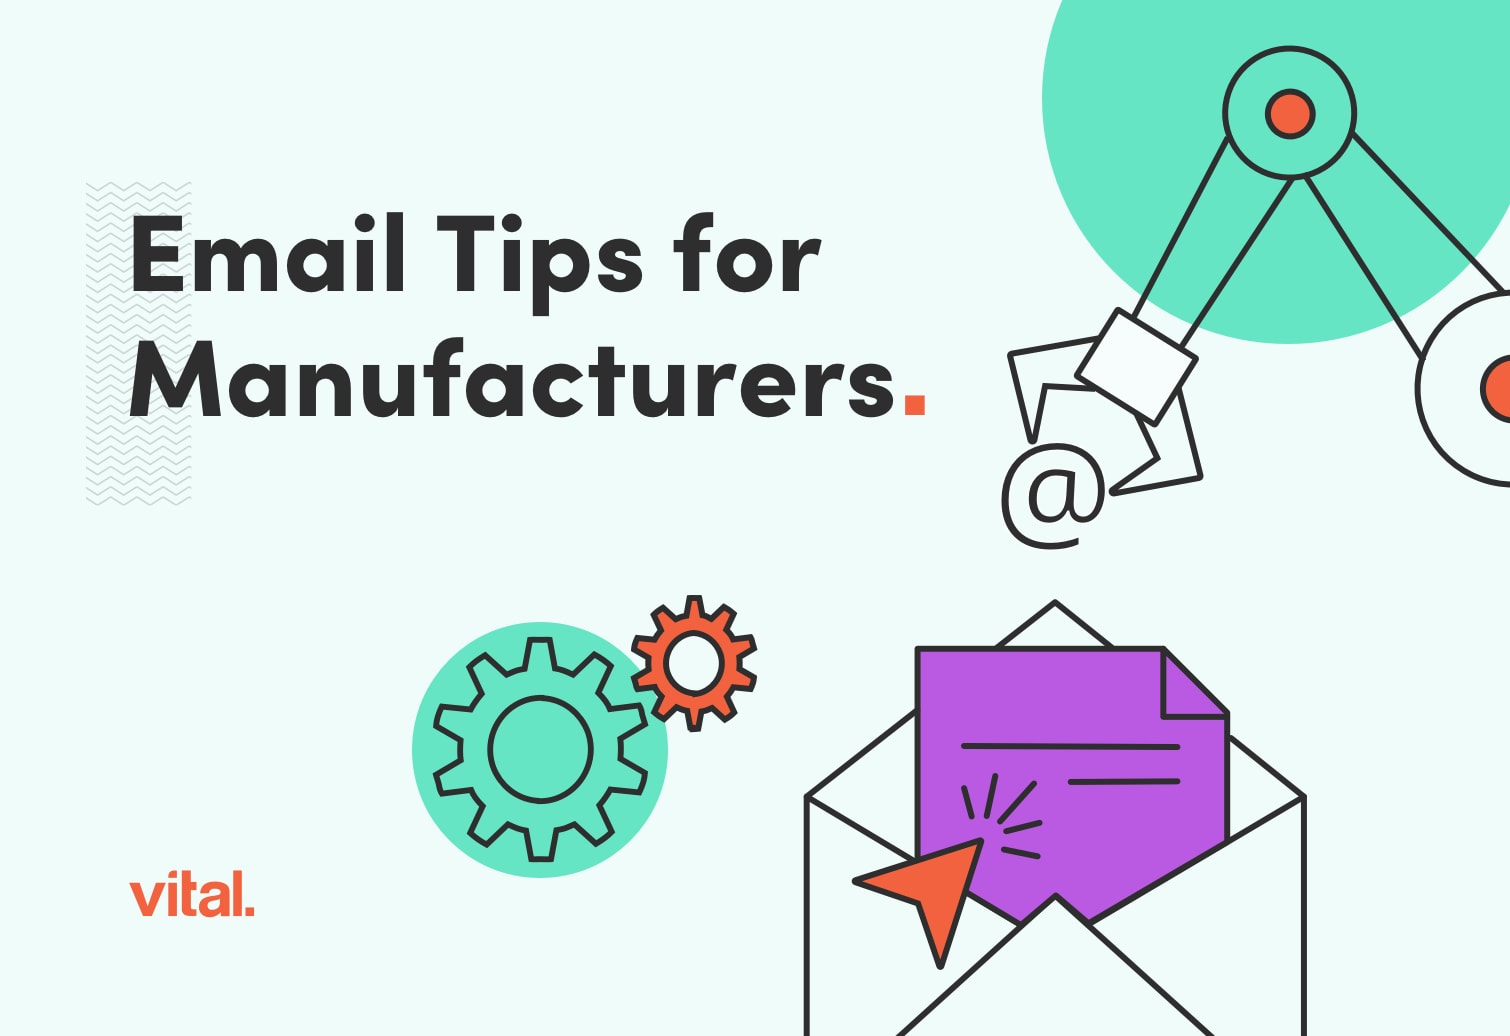 illustration of mechanical arm over an envelope with a purple document coming out. Overlay text says "email tips for manufacturers"